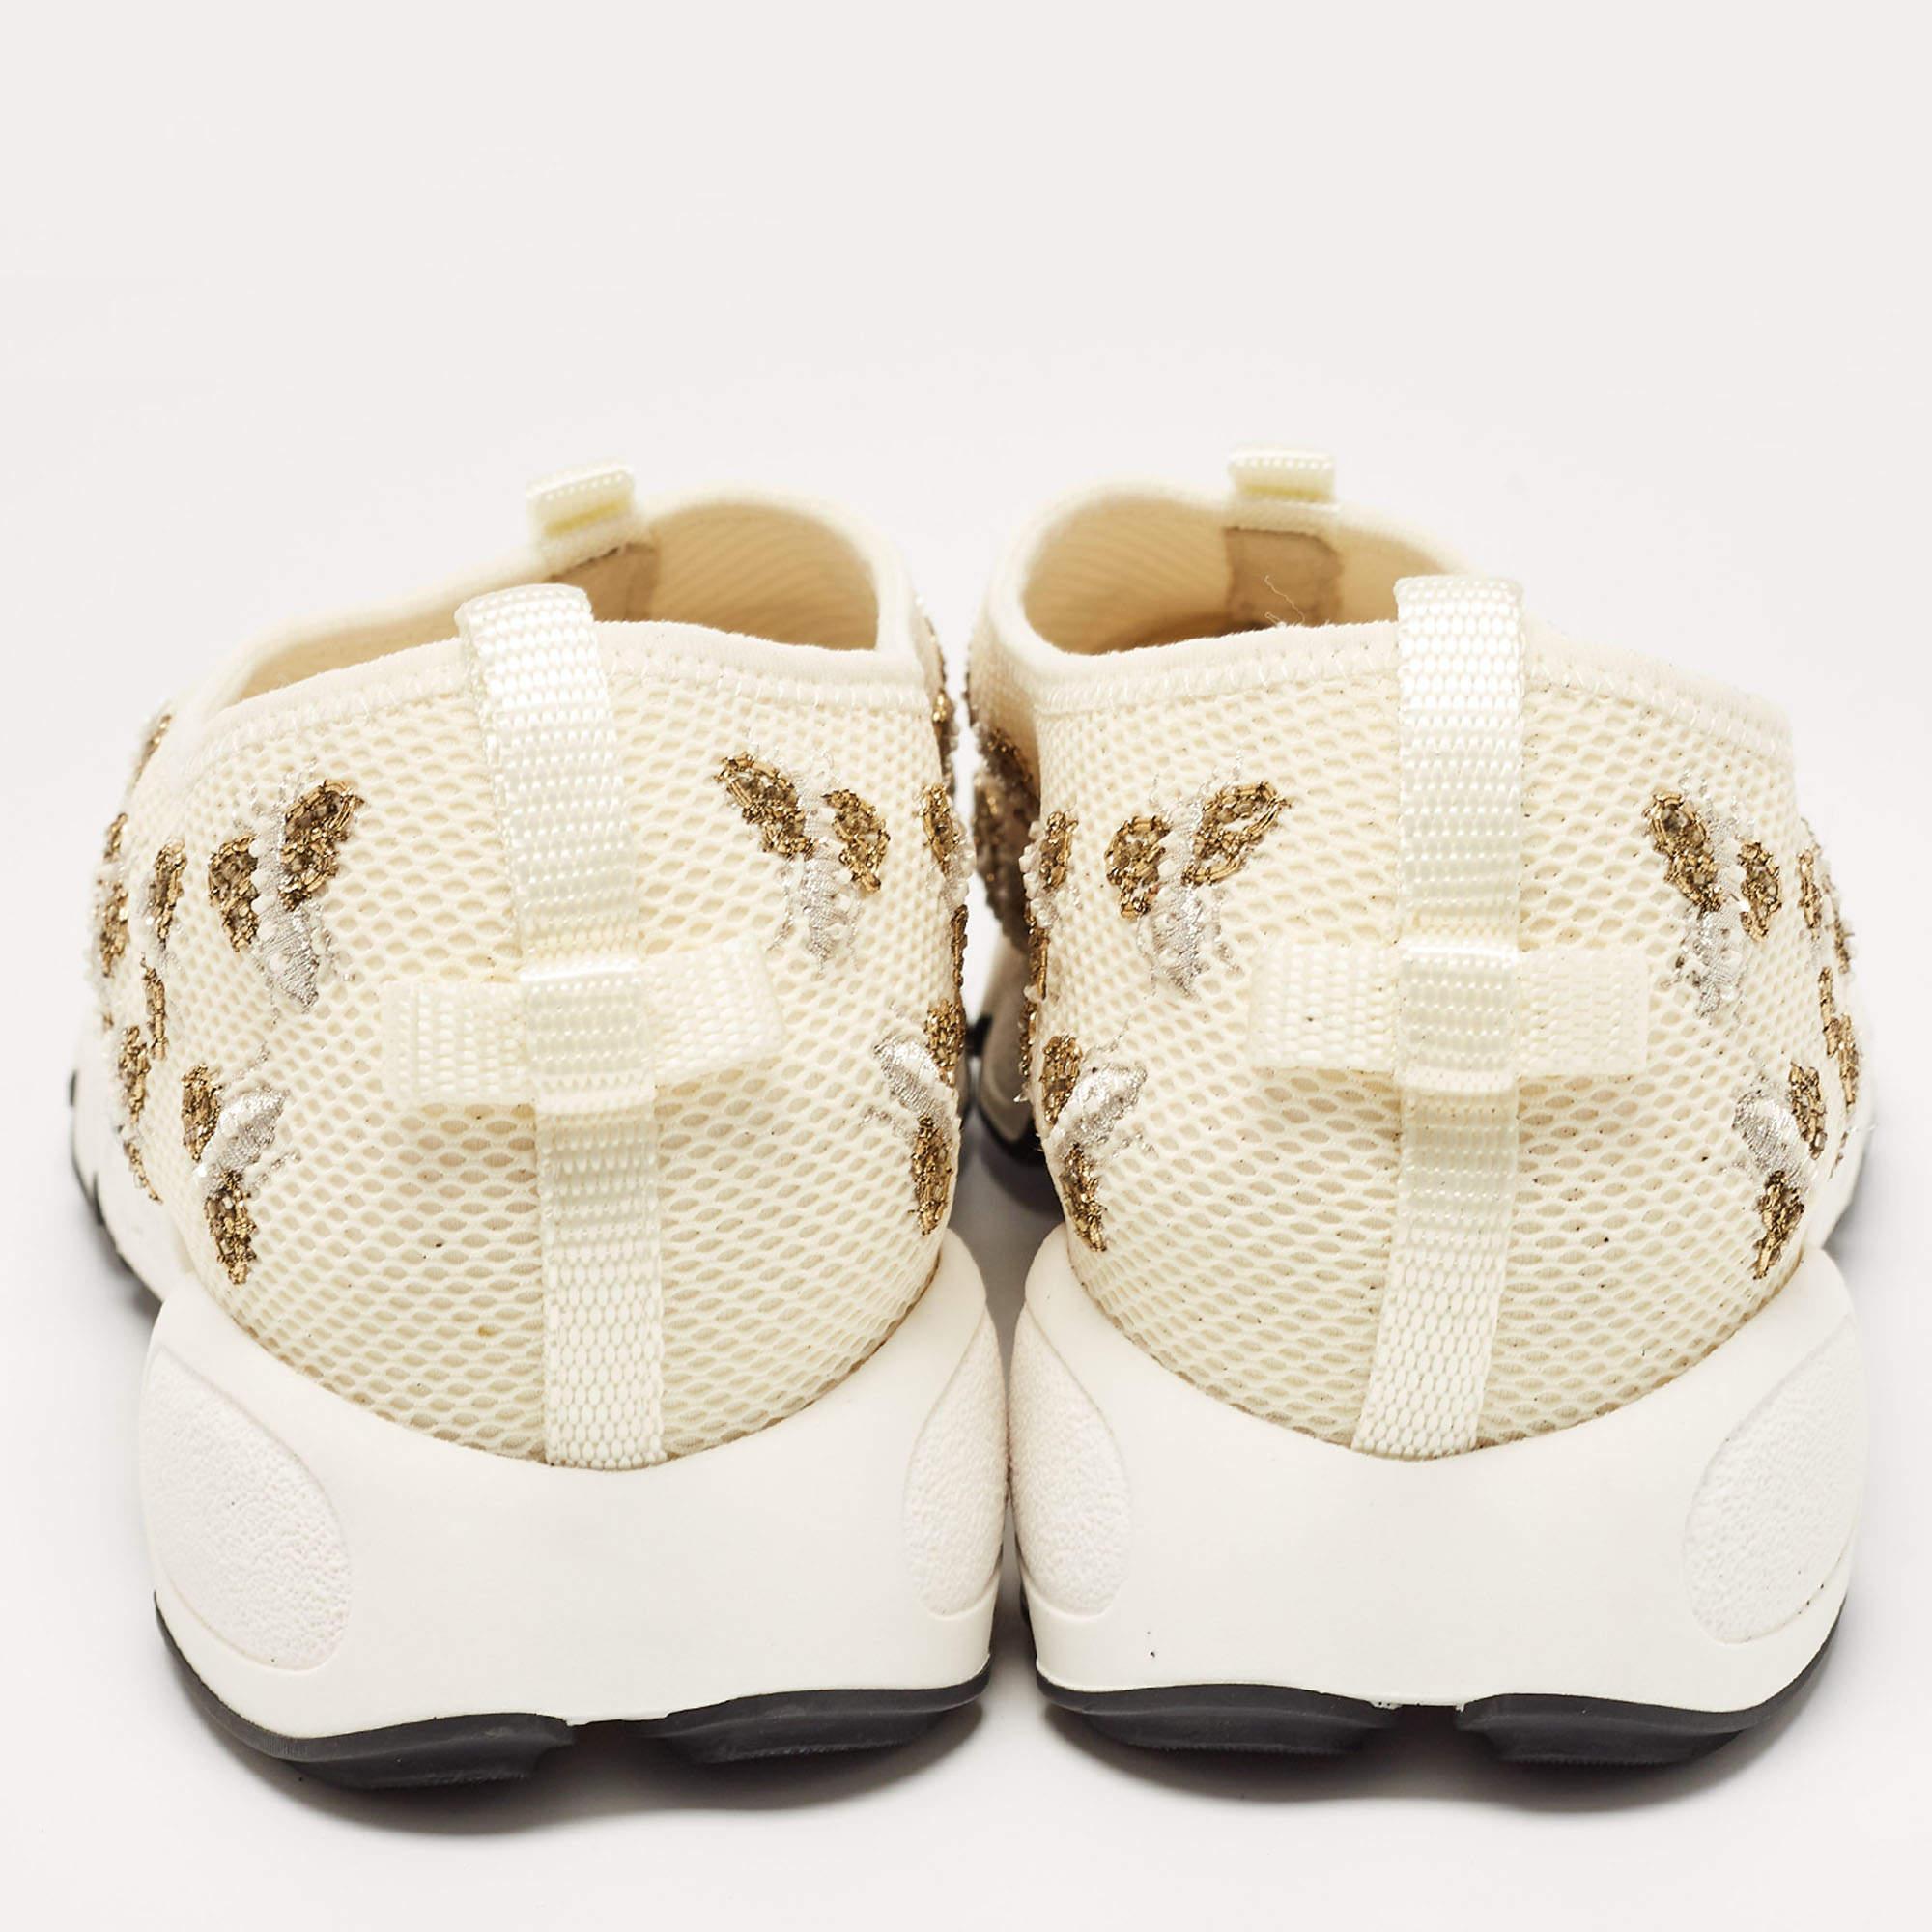 From the House of Dior, these sneakers are a beautiful creation that will elevate your style! They are made using mesh on the exterior with intricate embellishments highlighting their sturdy structure. They feature a low-top manner. Comfortable and